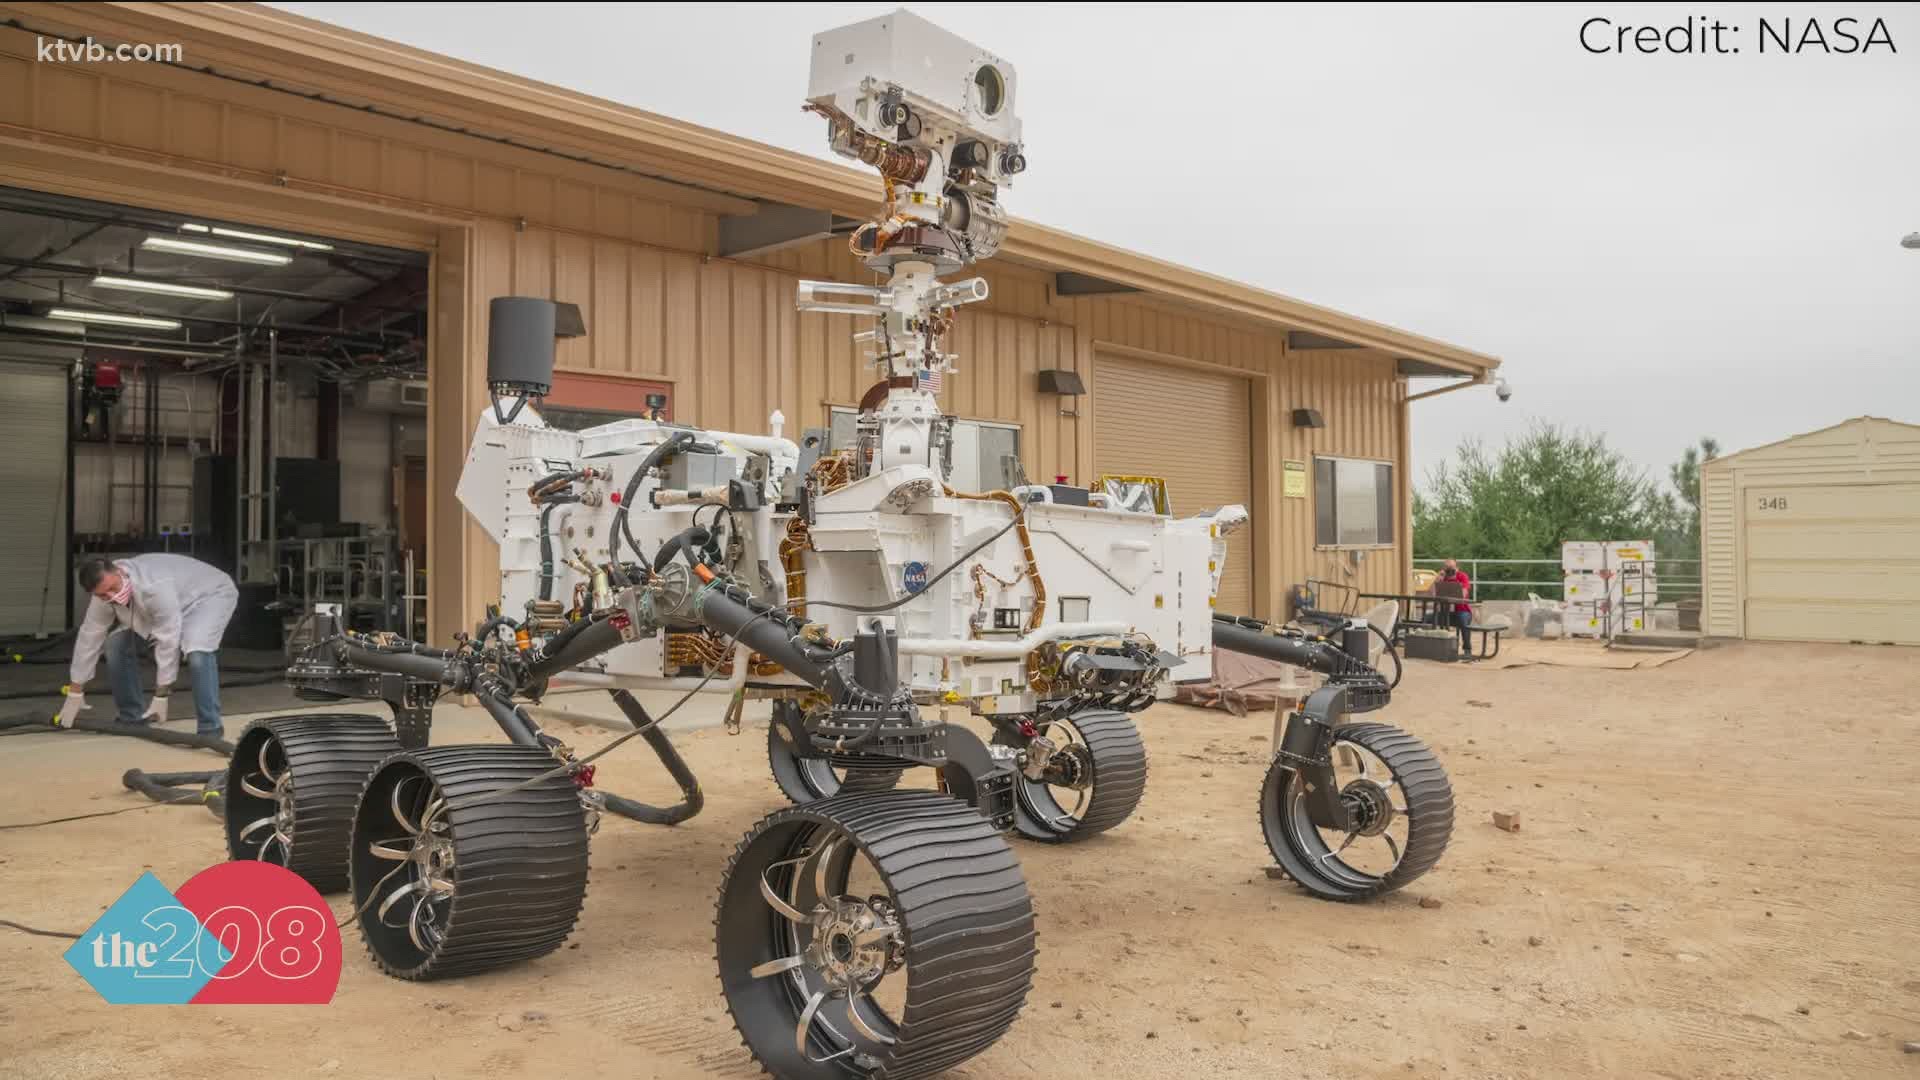 KTVB spoke with a team leader at the Idaho National Lab about their work to power the Mars project.